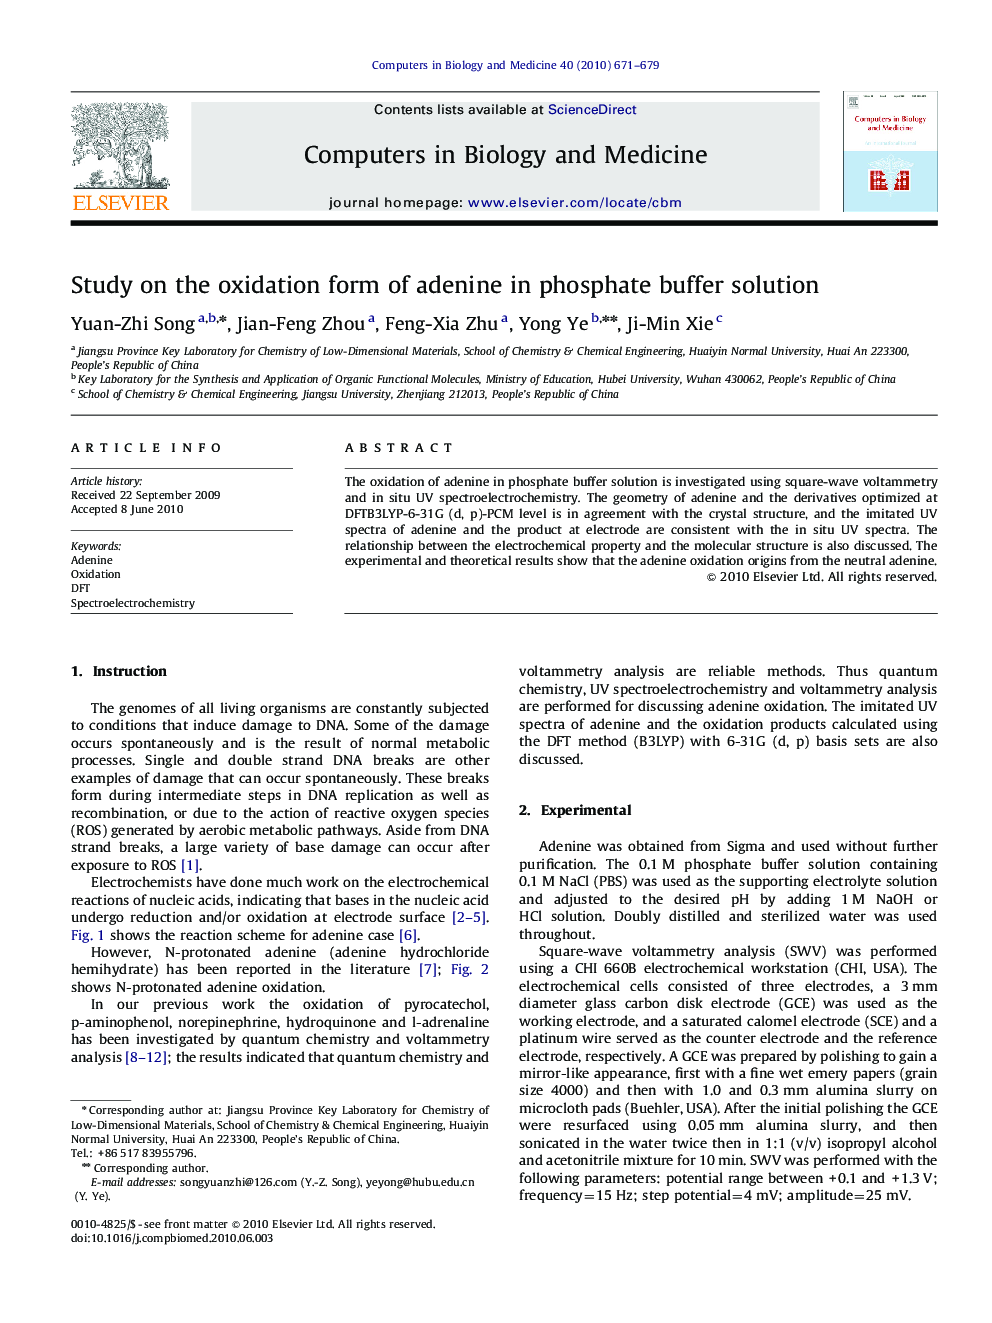 Study on the oxidation form of adenine in phosphate buffer solution